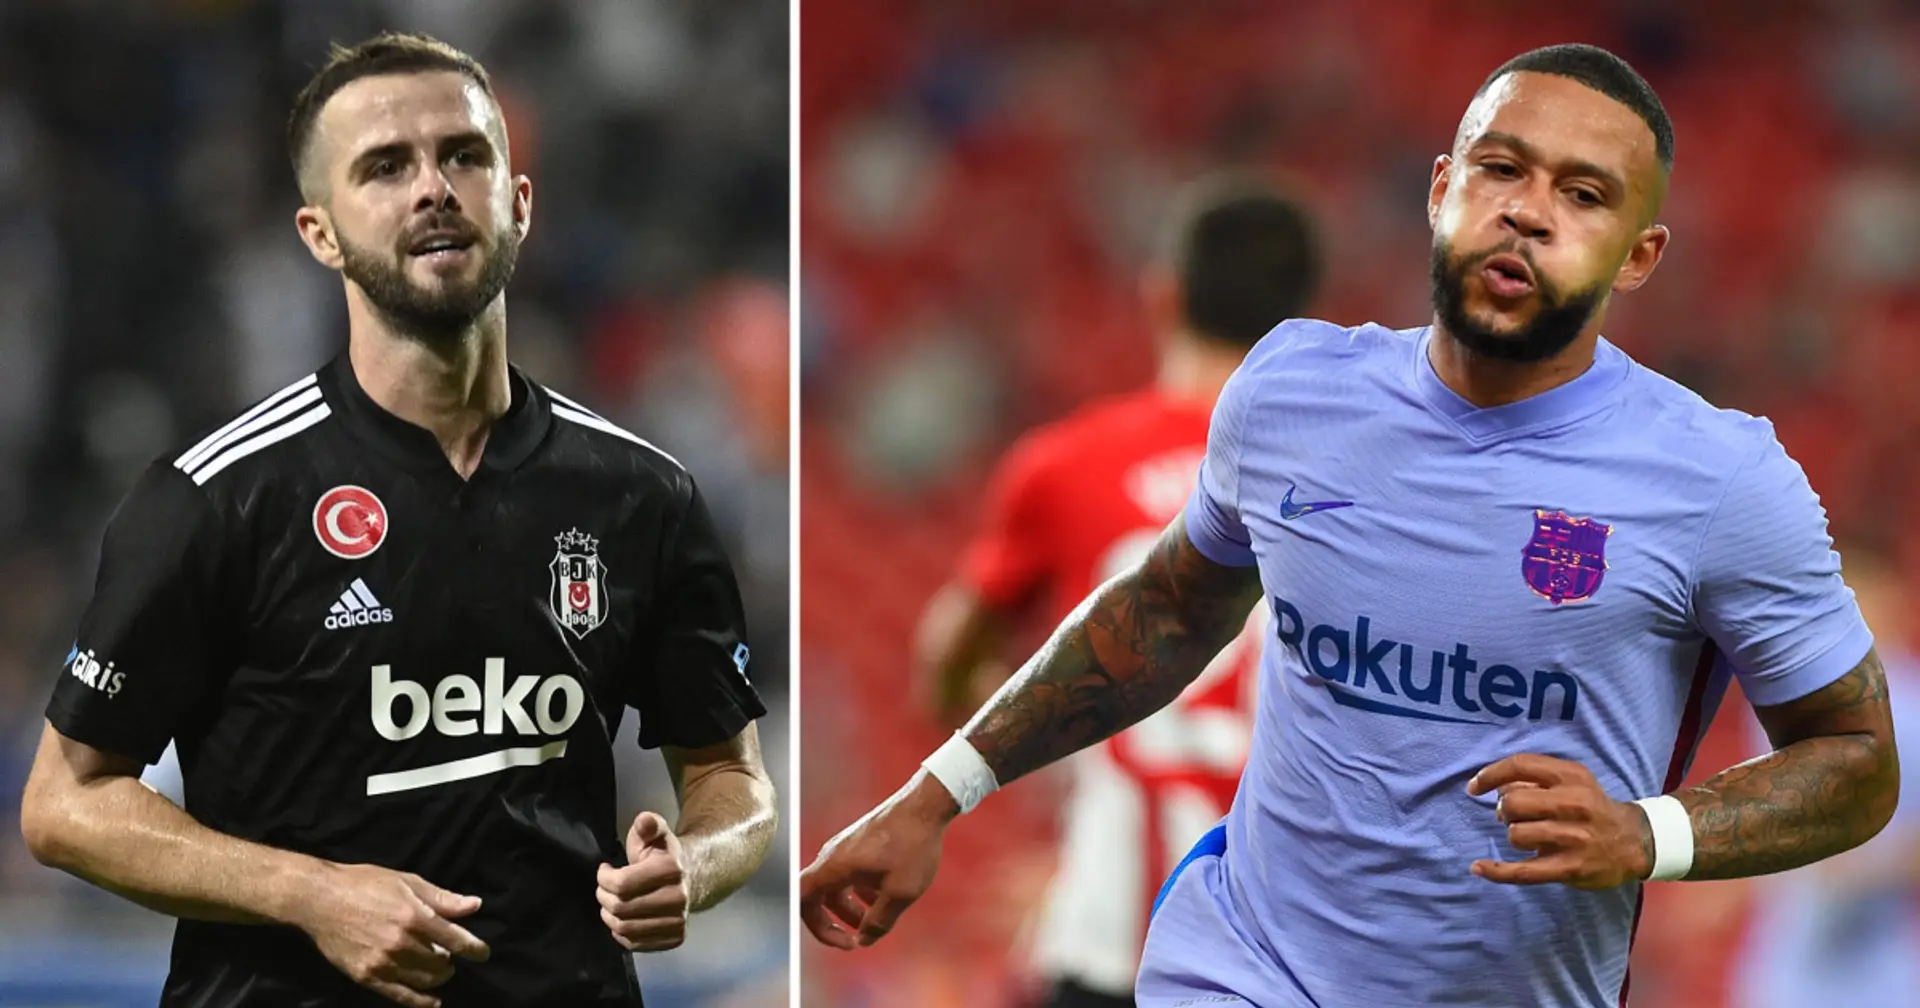 Inter Milan interested in Pjanic and Memphis (reliability: 3 stars)